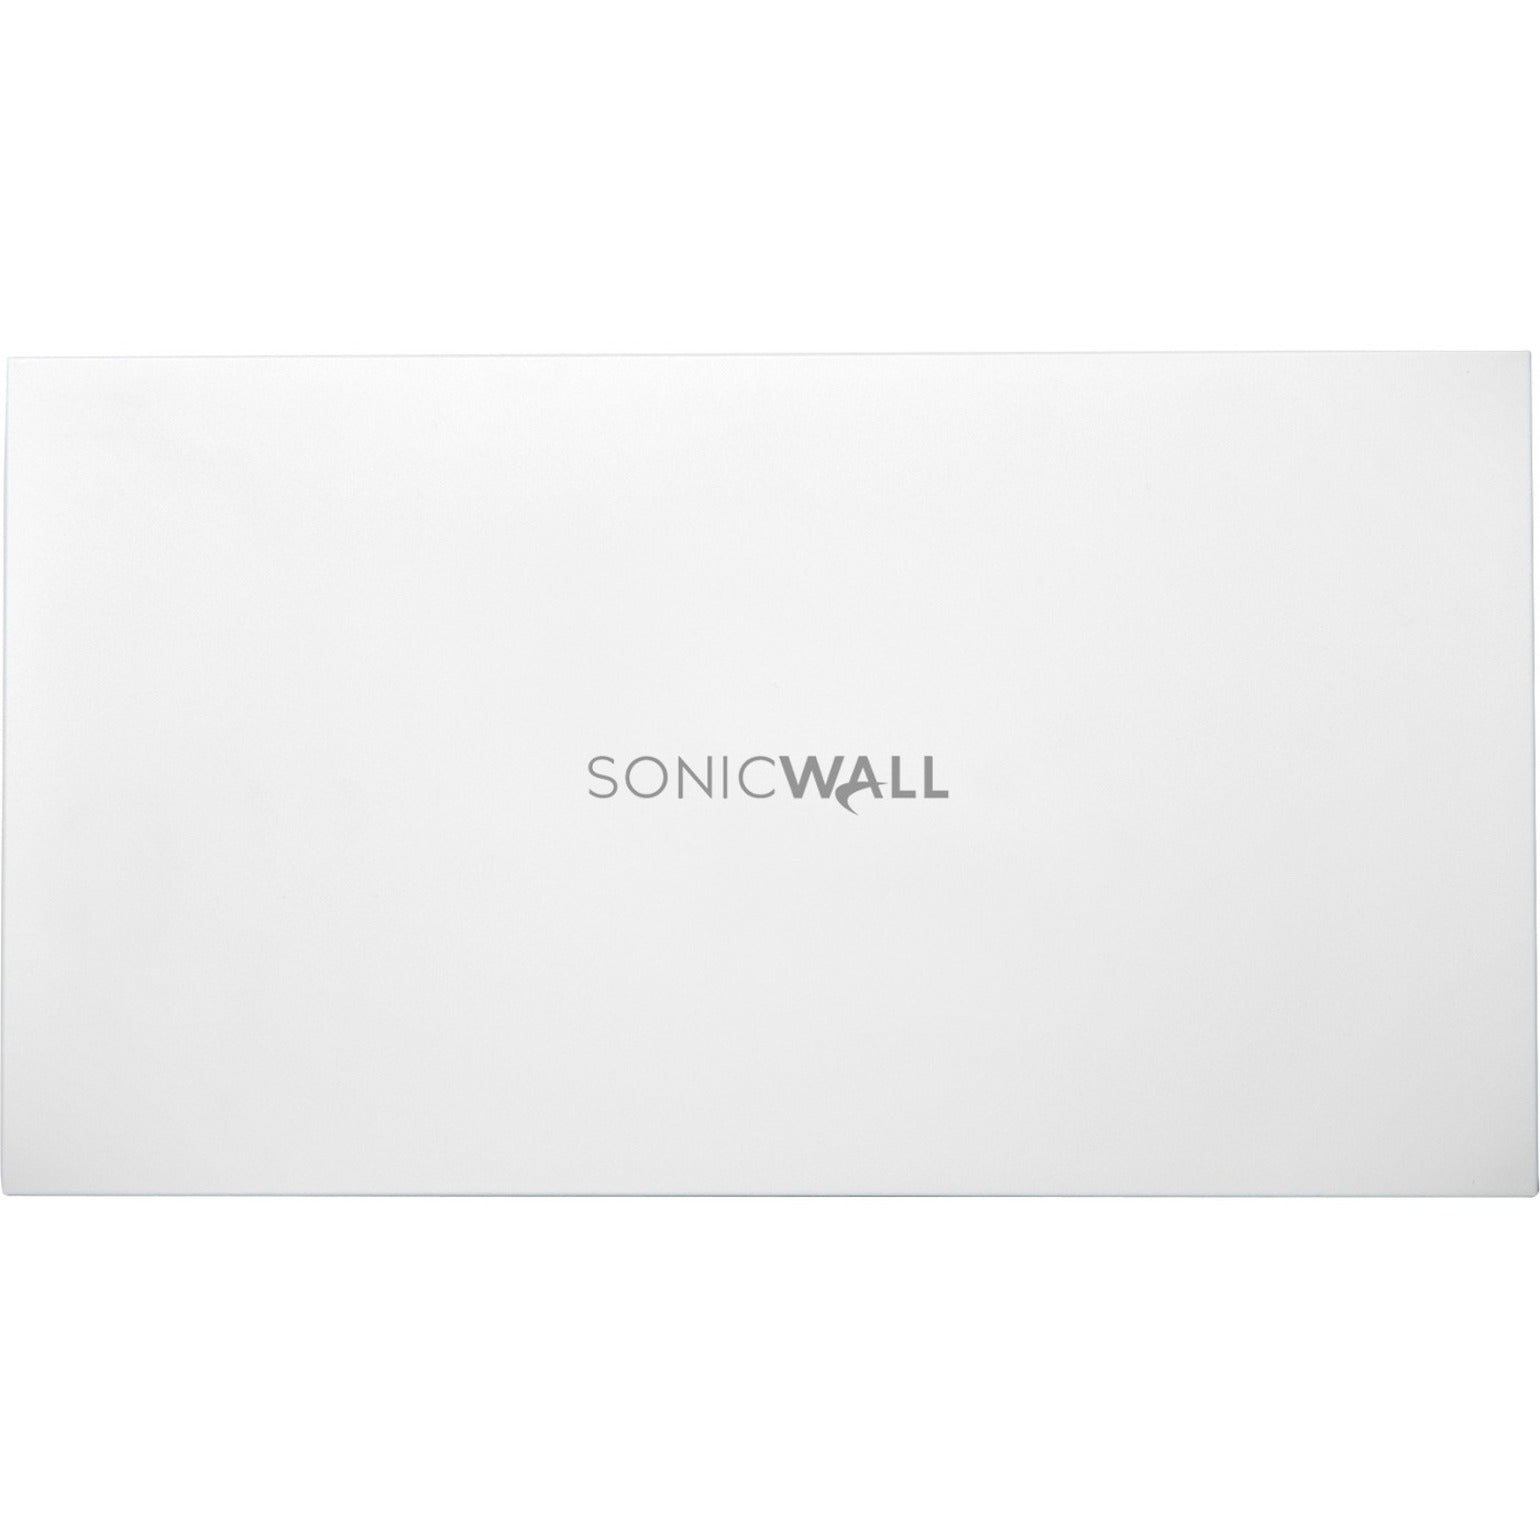 SonicWall 02-SSC-2521 SonicWave 231c Wireless Access Point, 8-Pack with Advanced Secure Cloud WiFi Management and Support 3YR